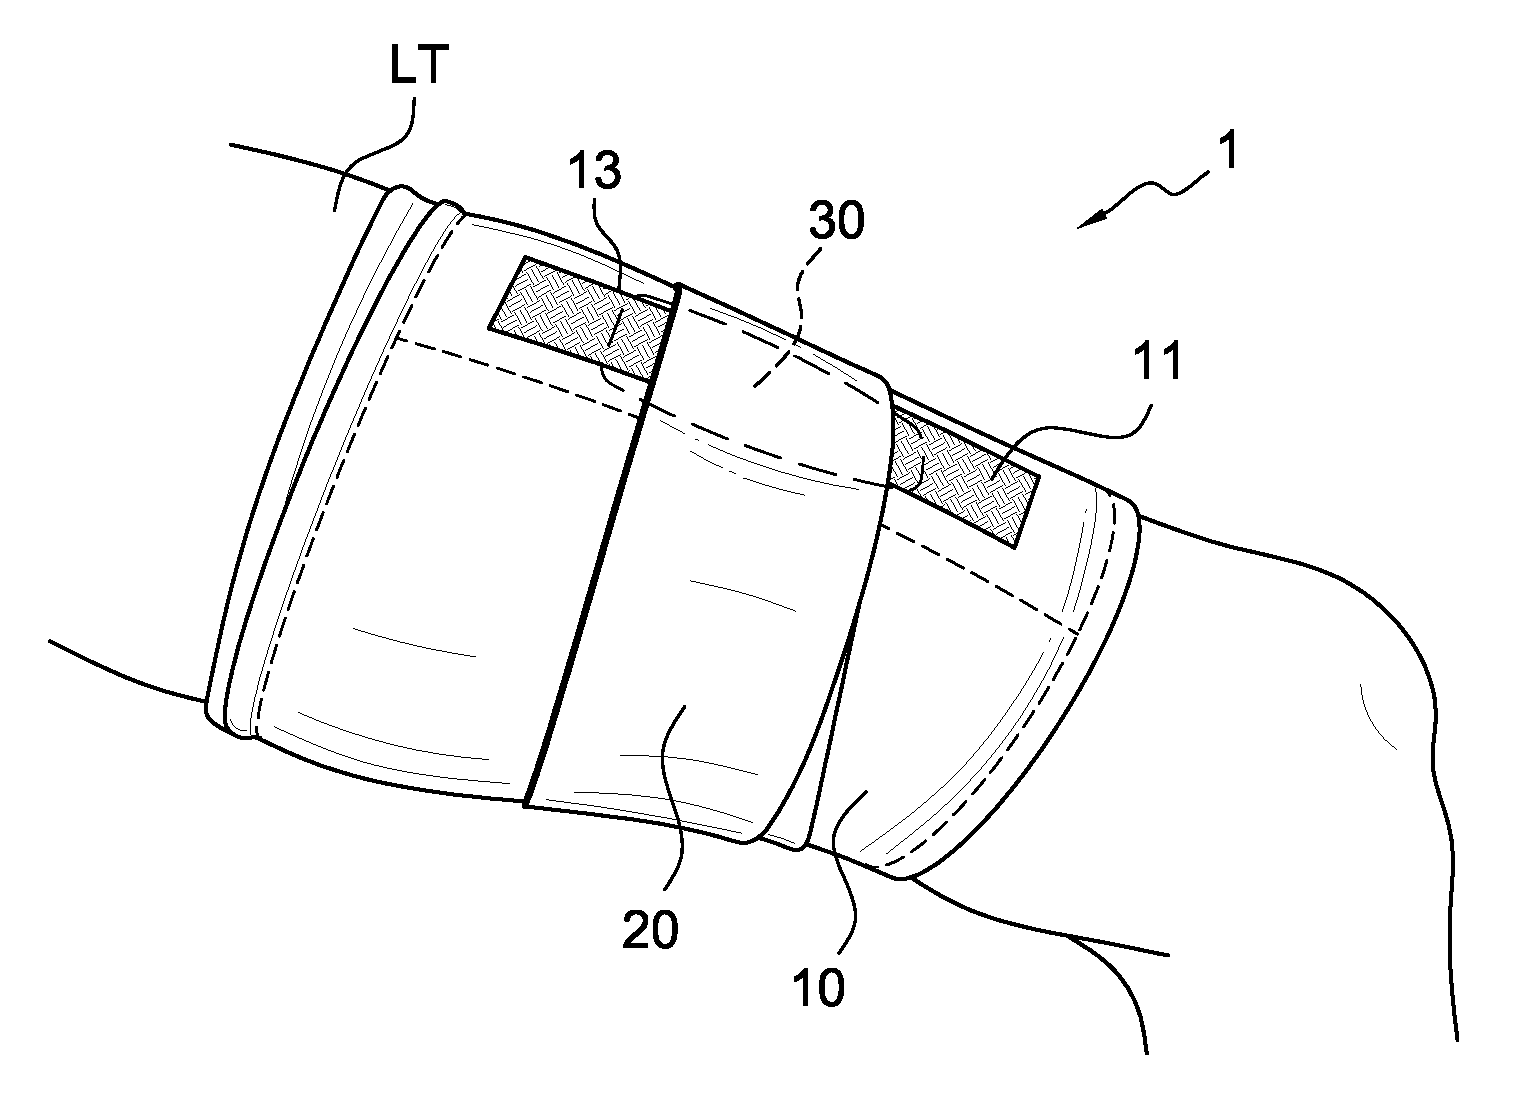 Apparatus for, and method of, reducing knee pain and/or increasing levels of athletic performance